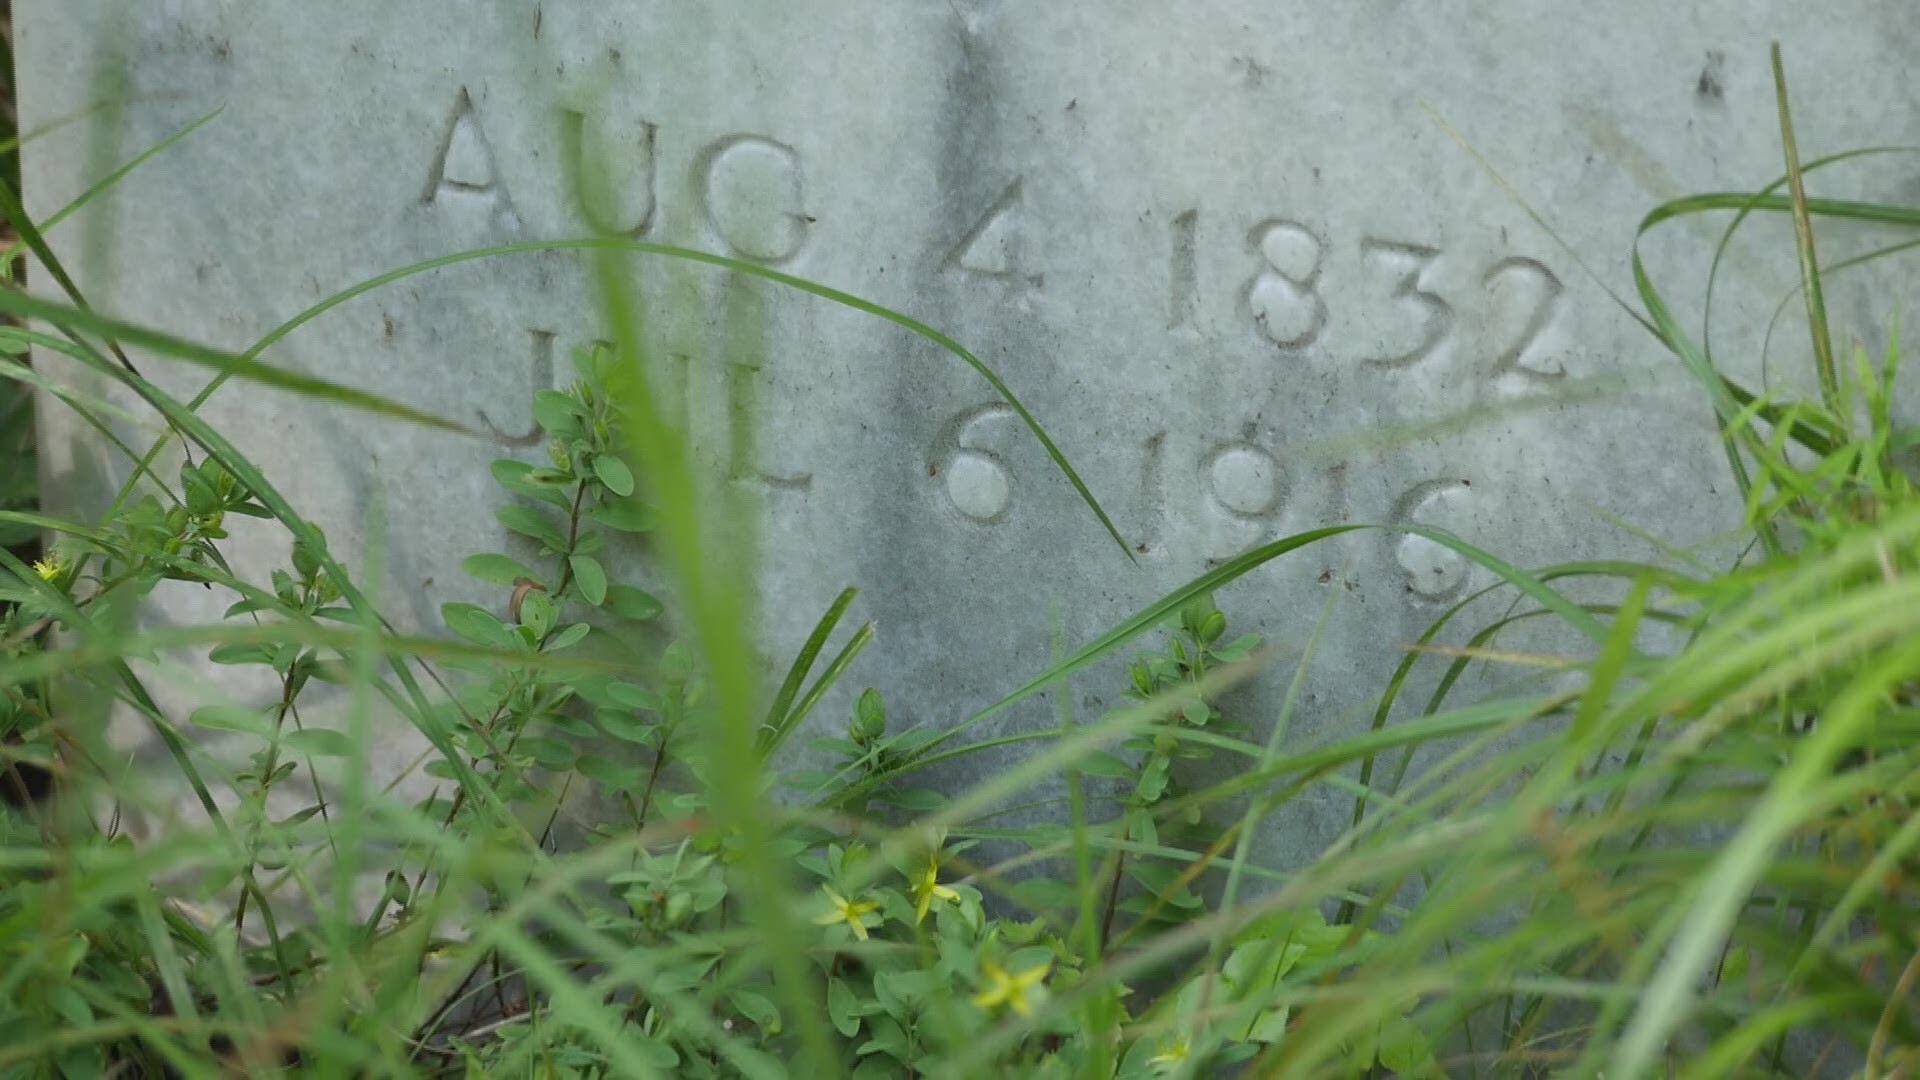 The project was launched in January 2020, and seeks to uncover veterans' graves hidden in the Smokies.